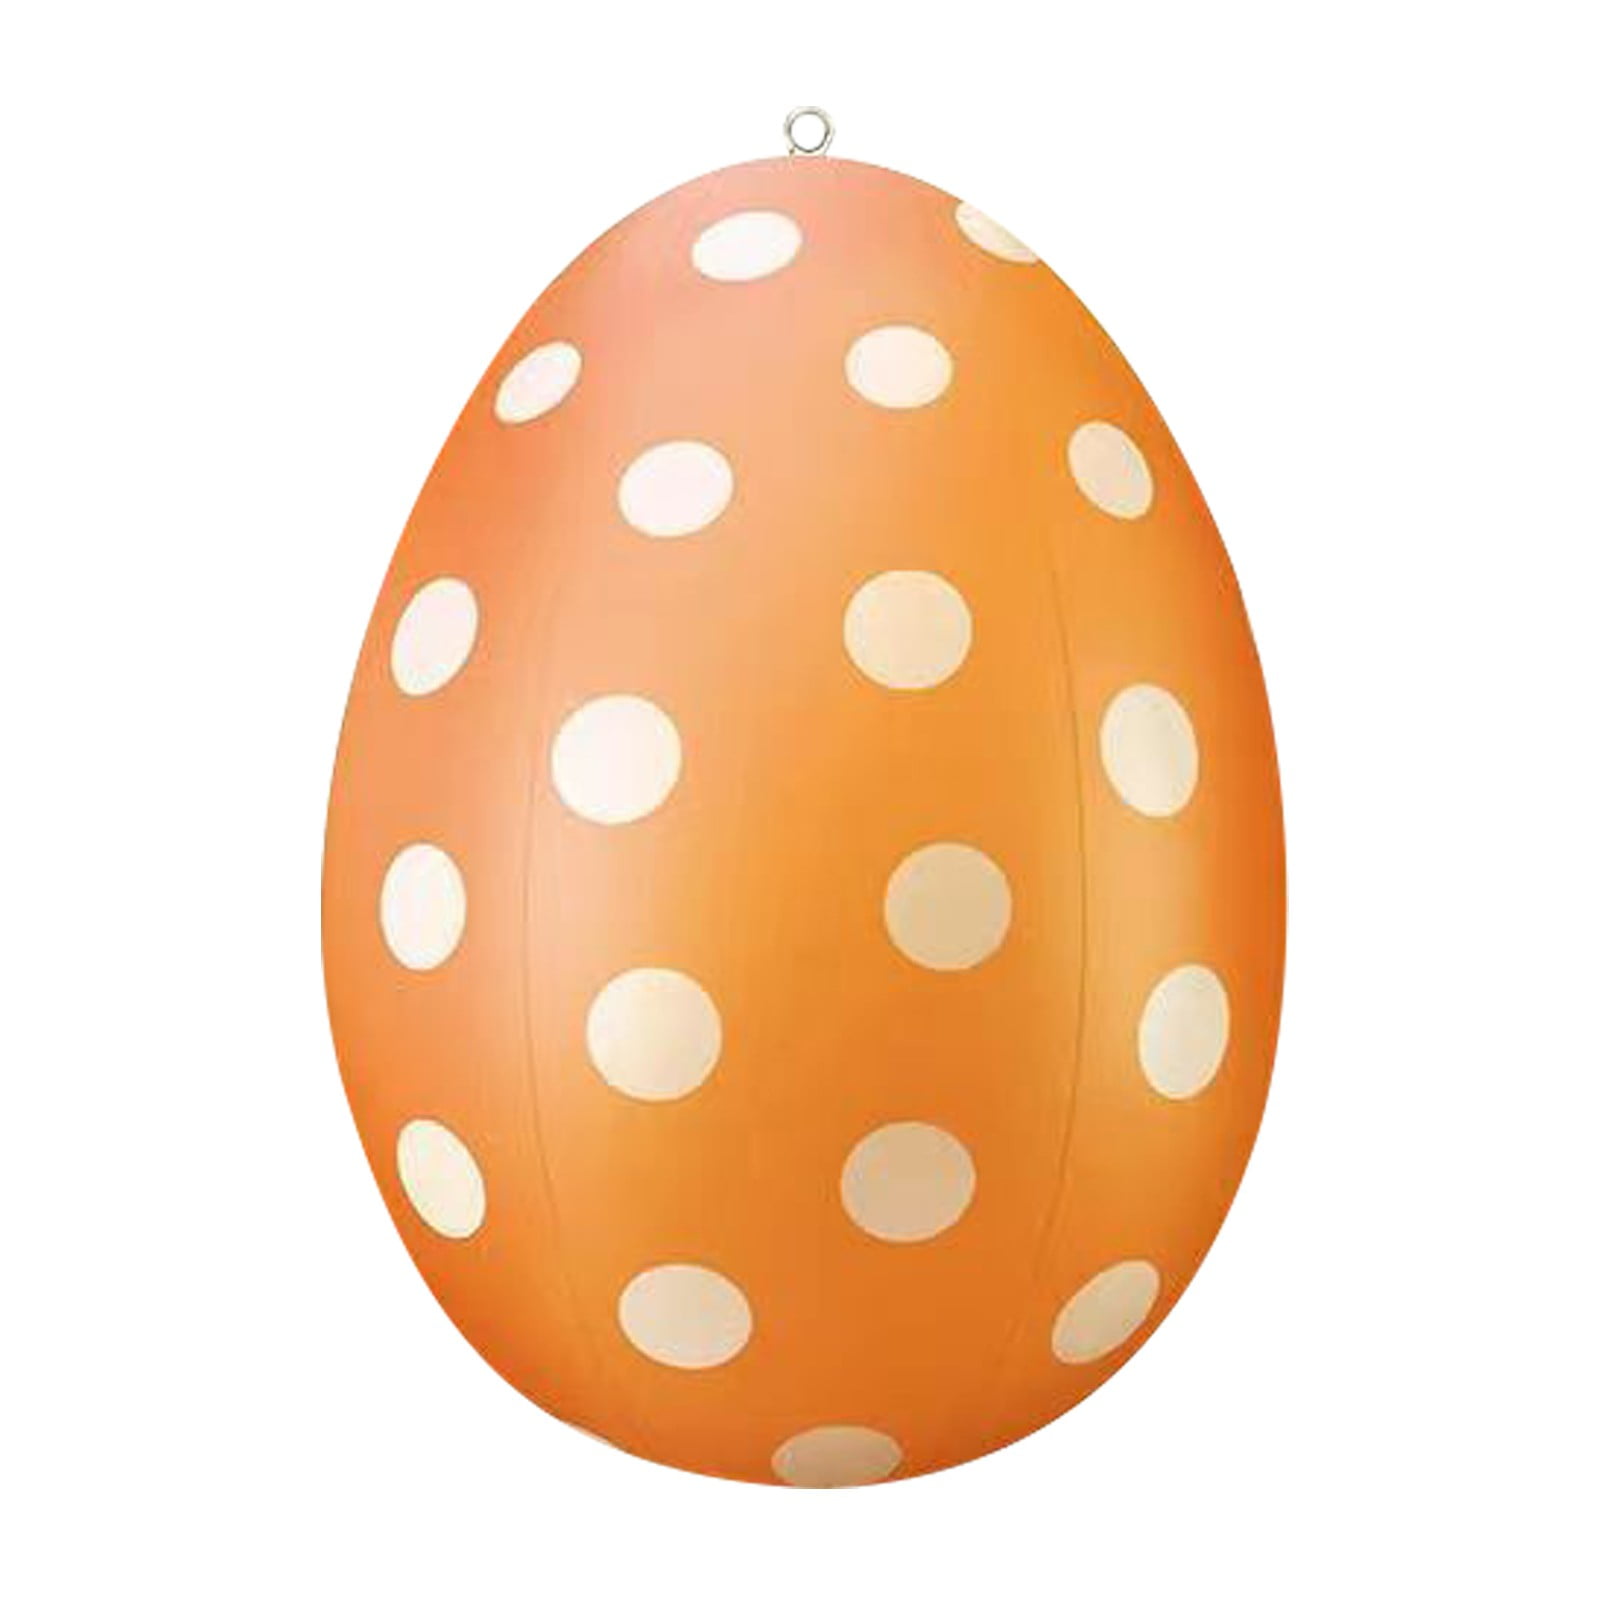 Huarll Party Decorations 16 inch Giant Egg Easter Pvc Inflatable Ball ...